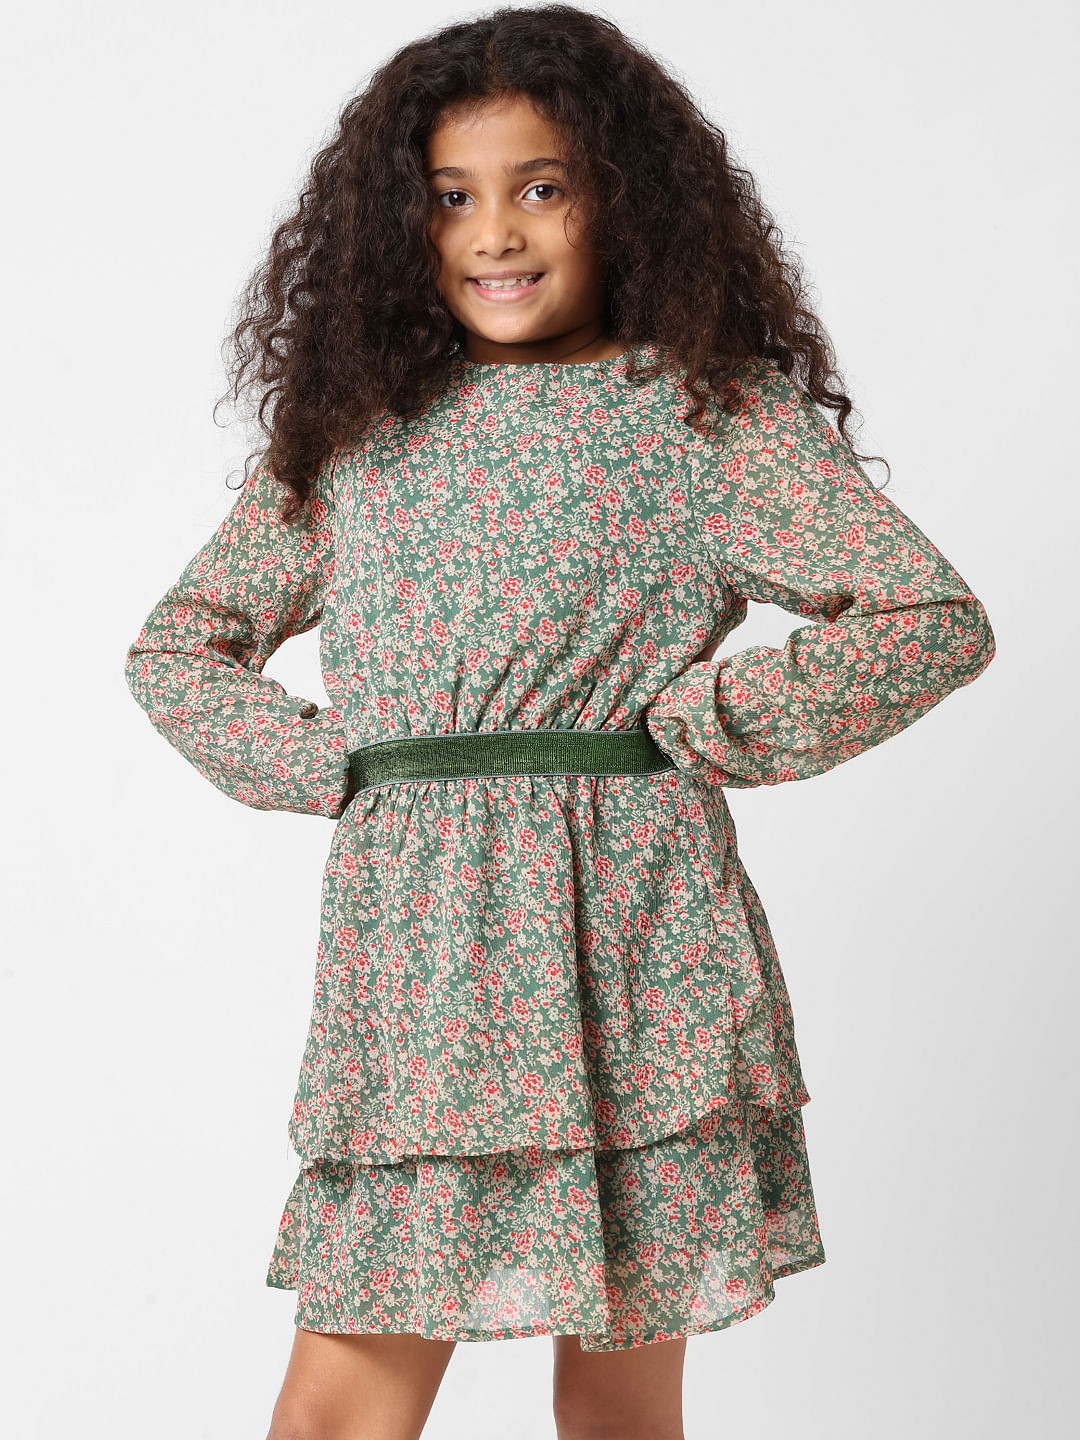 Buy Green Floral Fit & Flare Dress for Girls Online at KIDS ONLY | 155221401